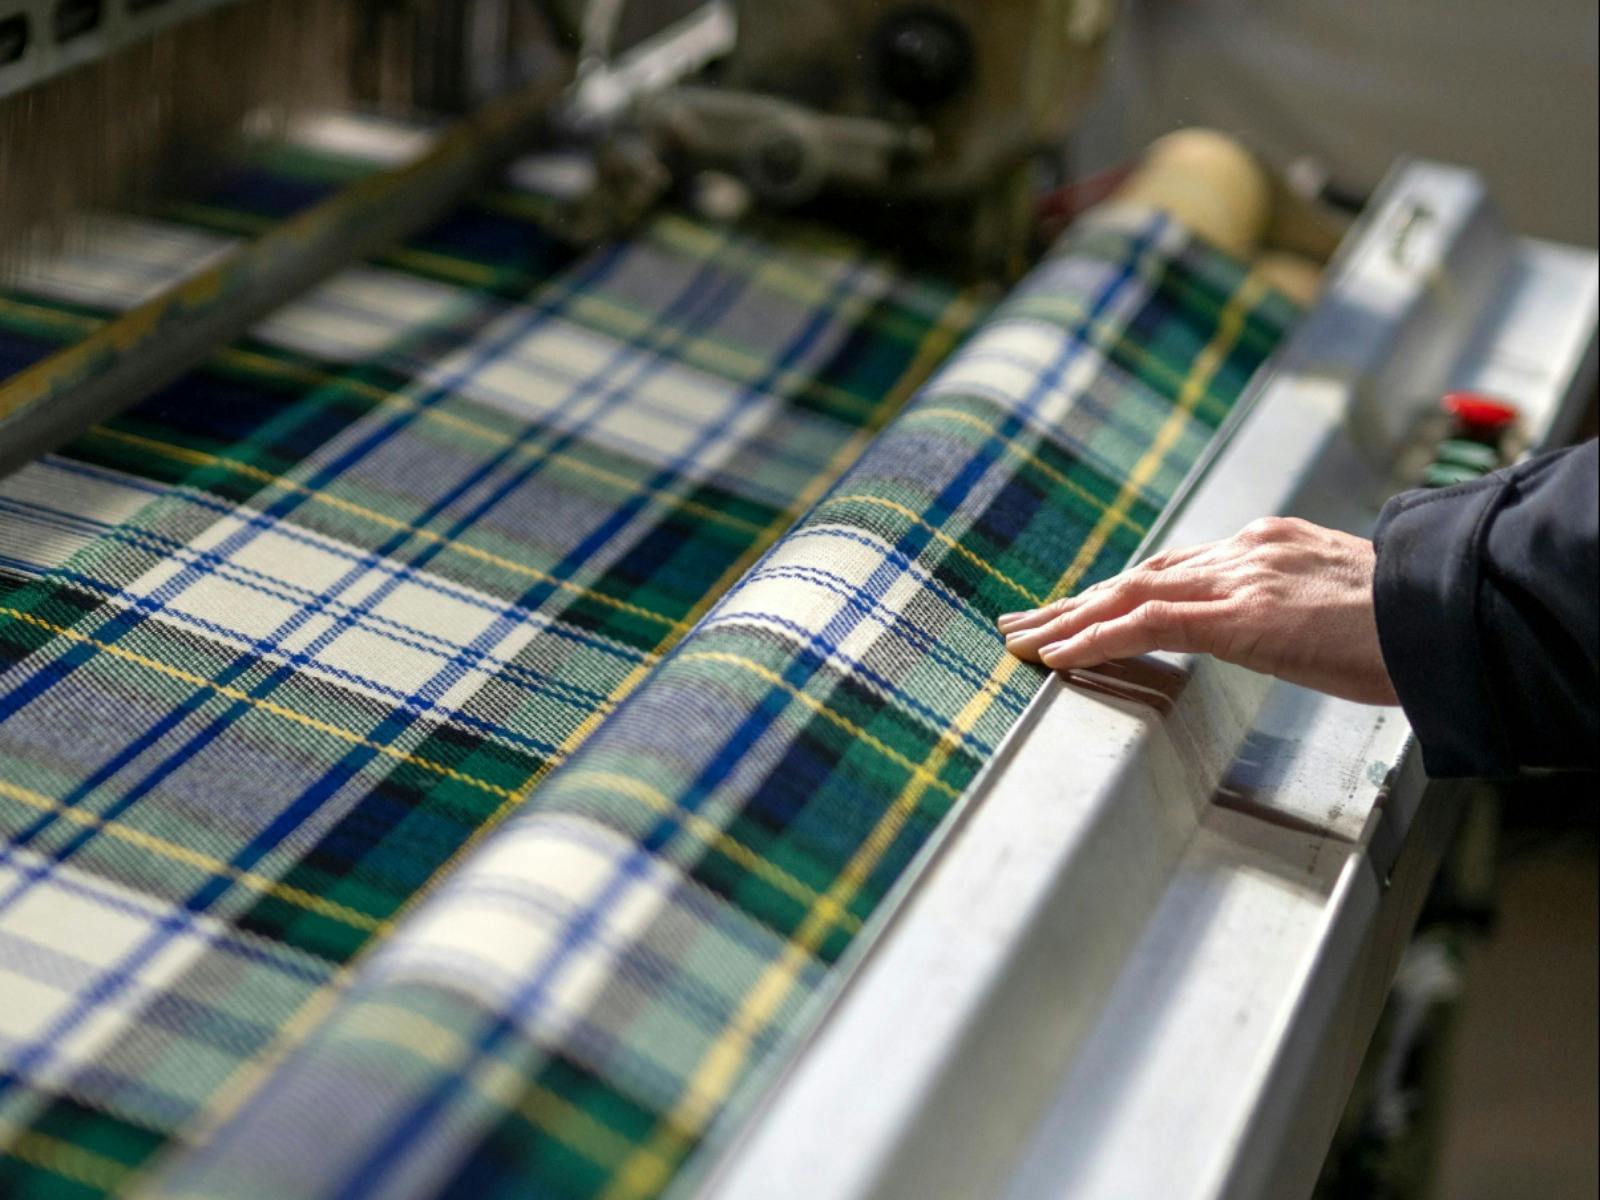 Blue, white and green tartan blanket during production with hand checking wool fibres.